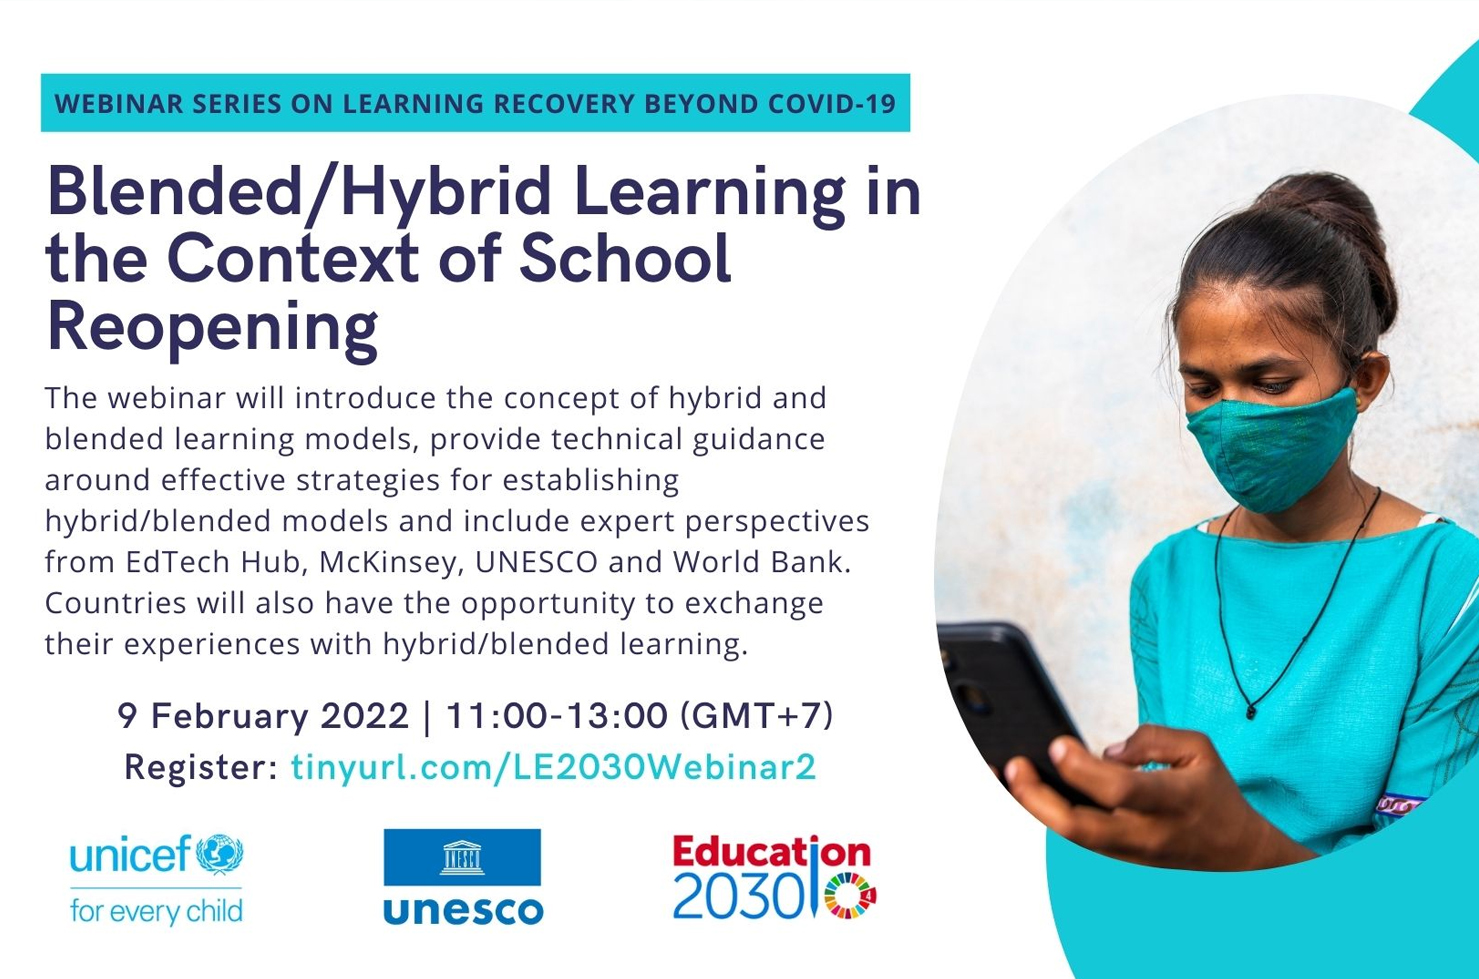 Blended/Hybrid Learning in the Context of School Reopening’ at 11:00 (GMT+7) on 9 February 2022